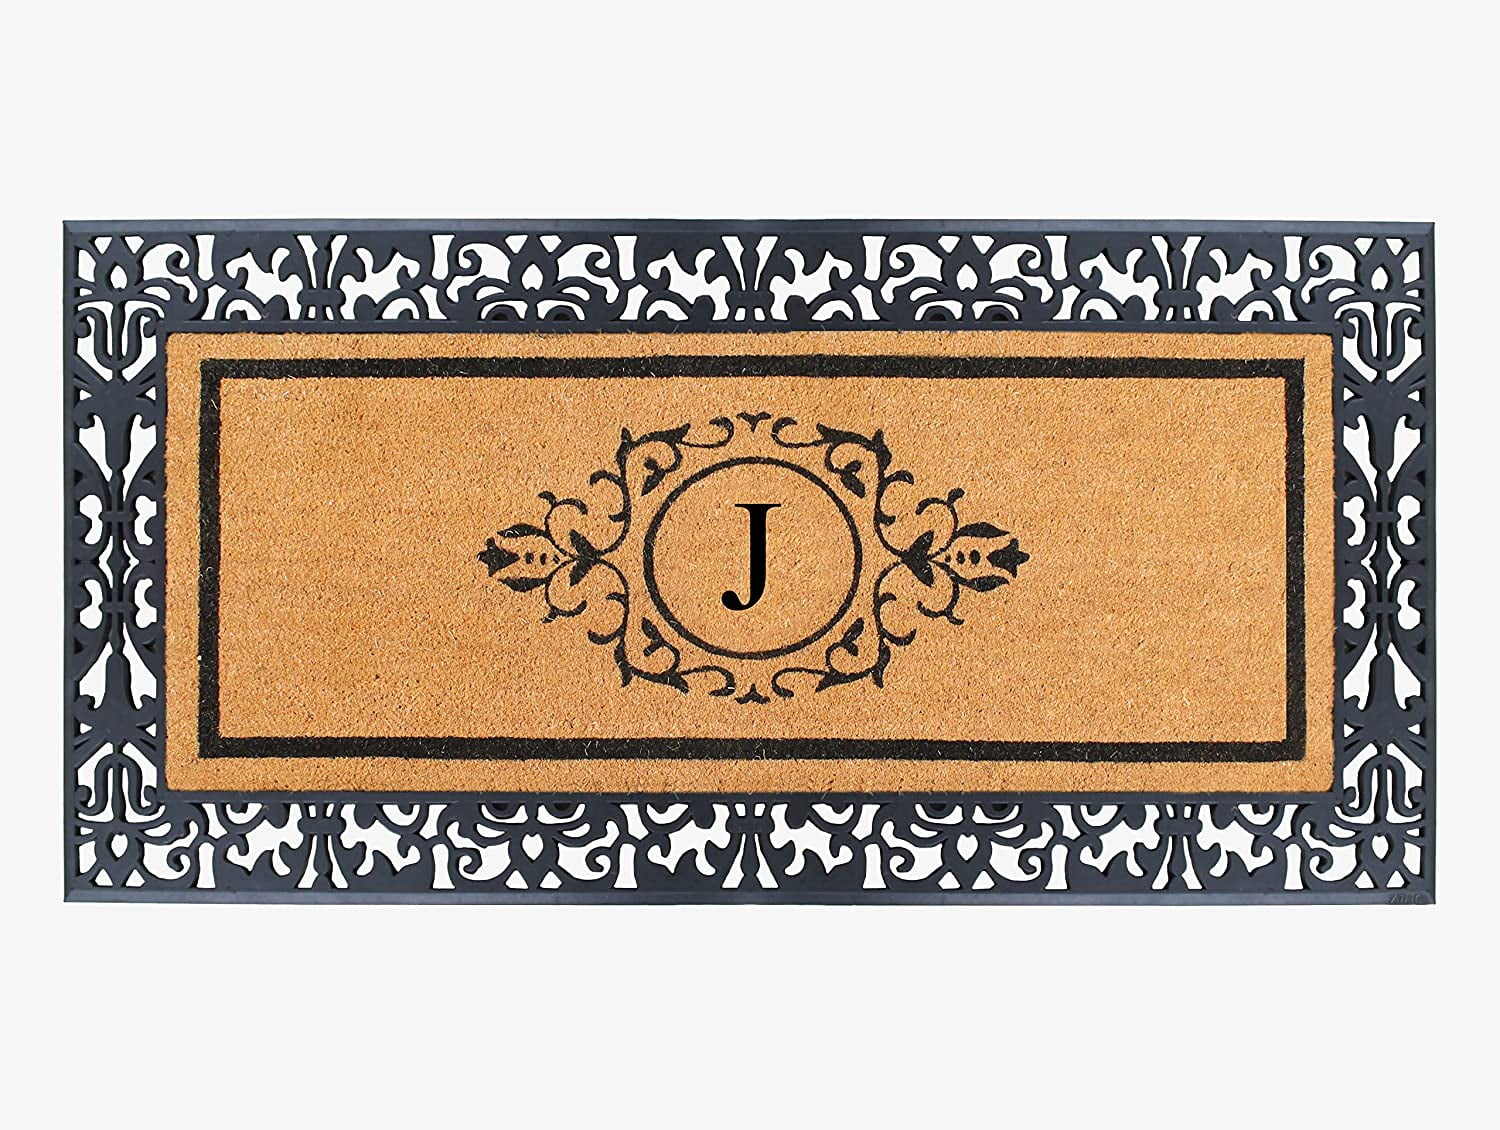 A1 Home Collections A1HC Flock Beige 24 in. x 39 in. Natural Coir  Thin-Profile Non-Slip Durable Large Outdoor Monogrammed G Door Mat  200021-BR-FL-G - The Home Depot